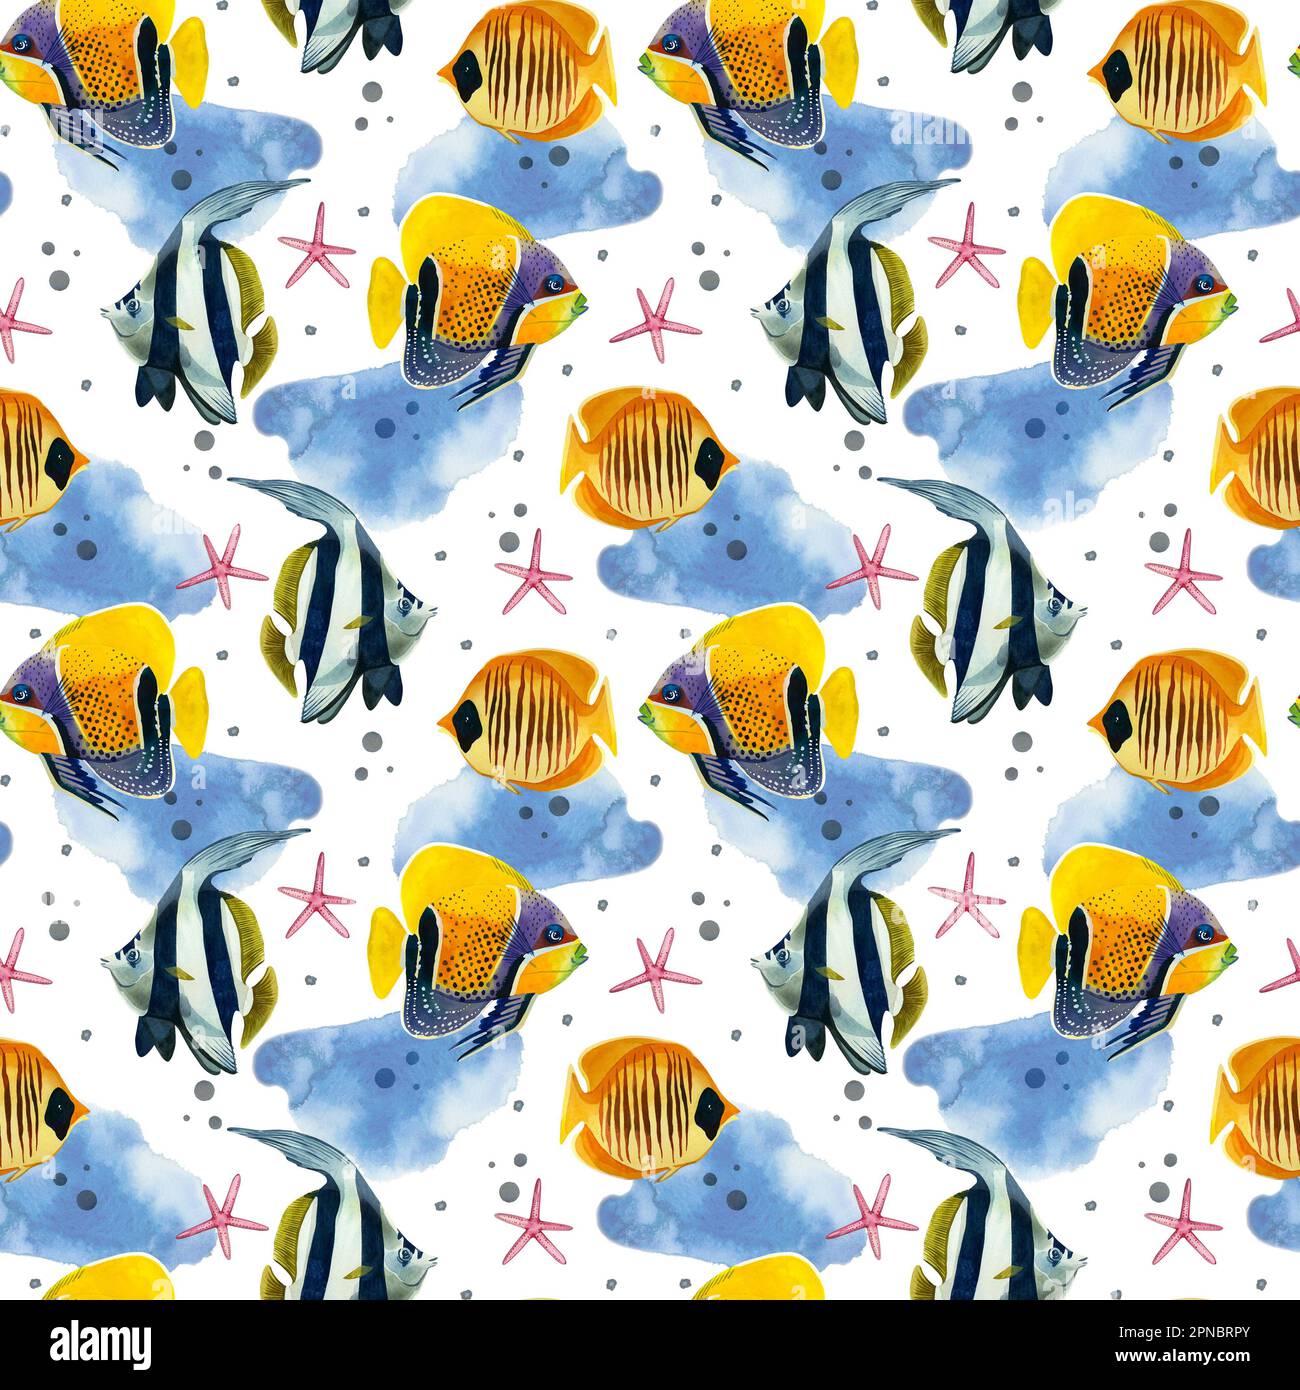 Seamless pattern. Tropical fish in bright colors, pink stars and blue spots hand-drawn in watercolor on a white background. Stock Photo